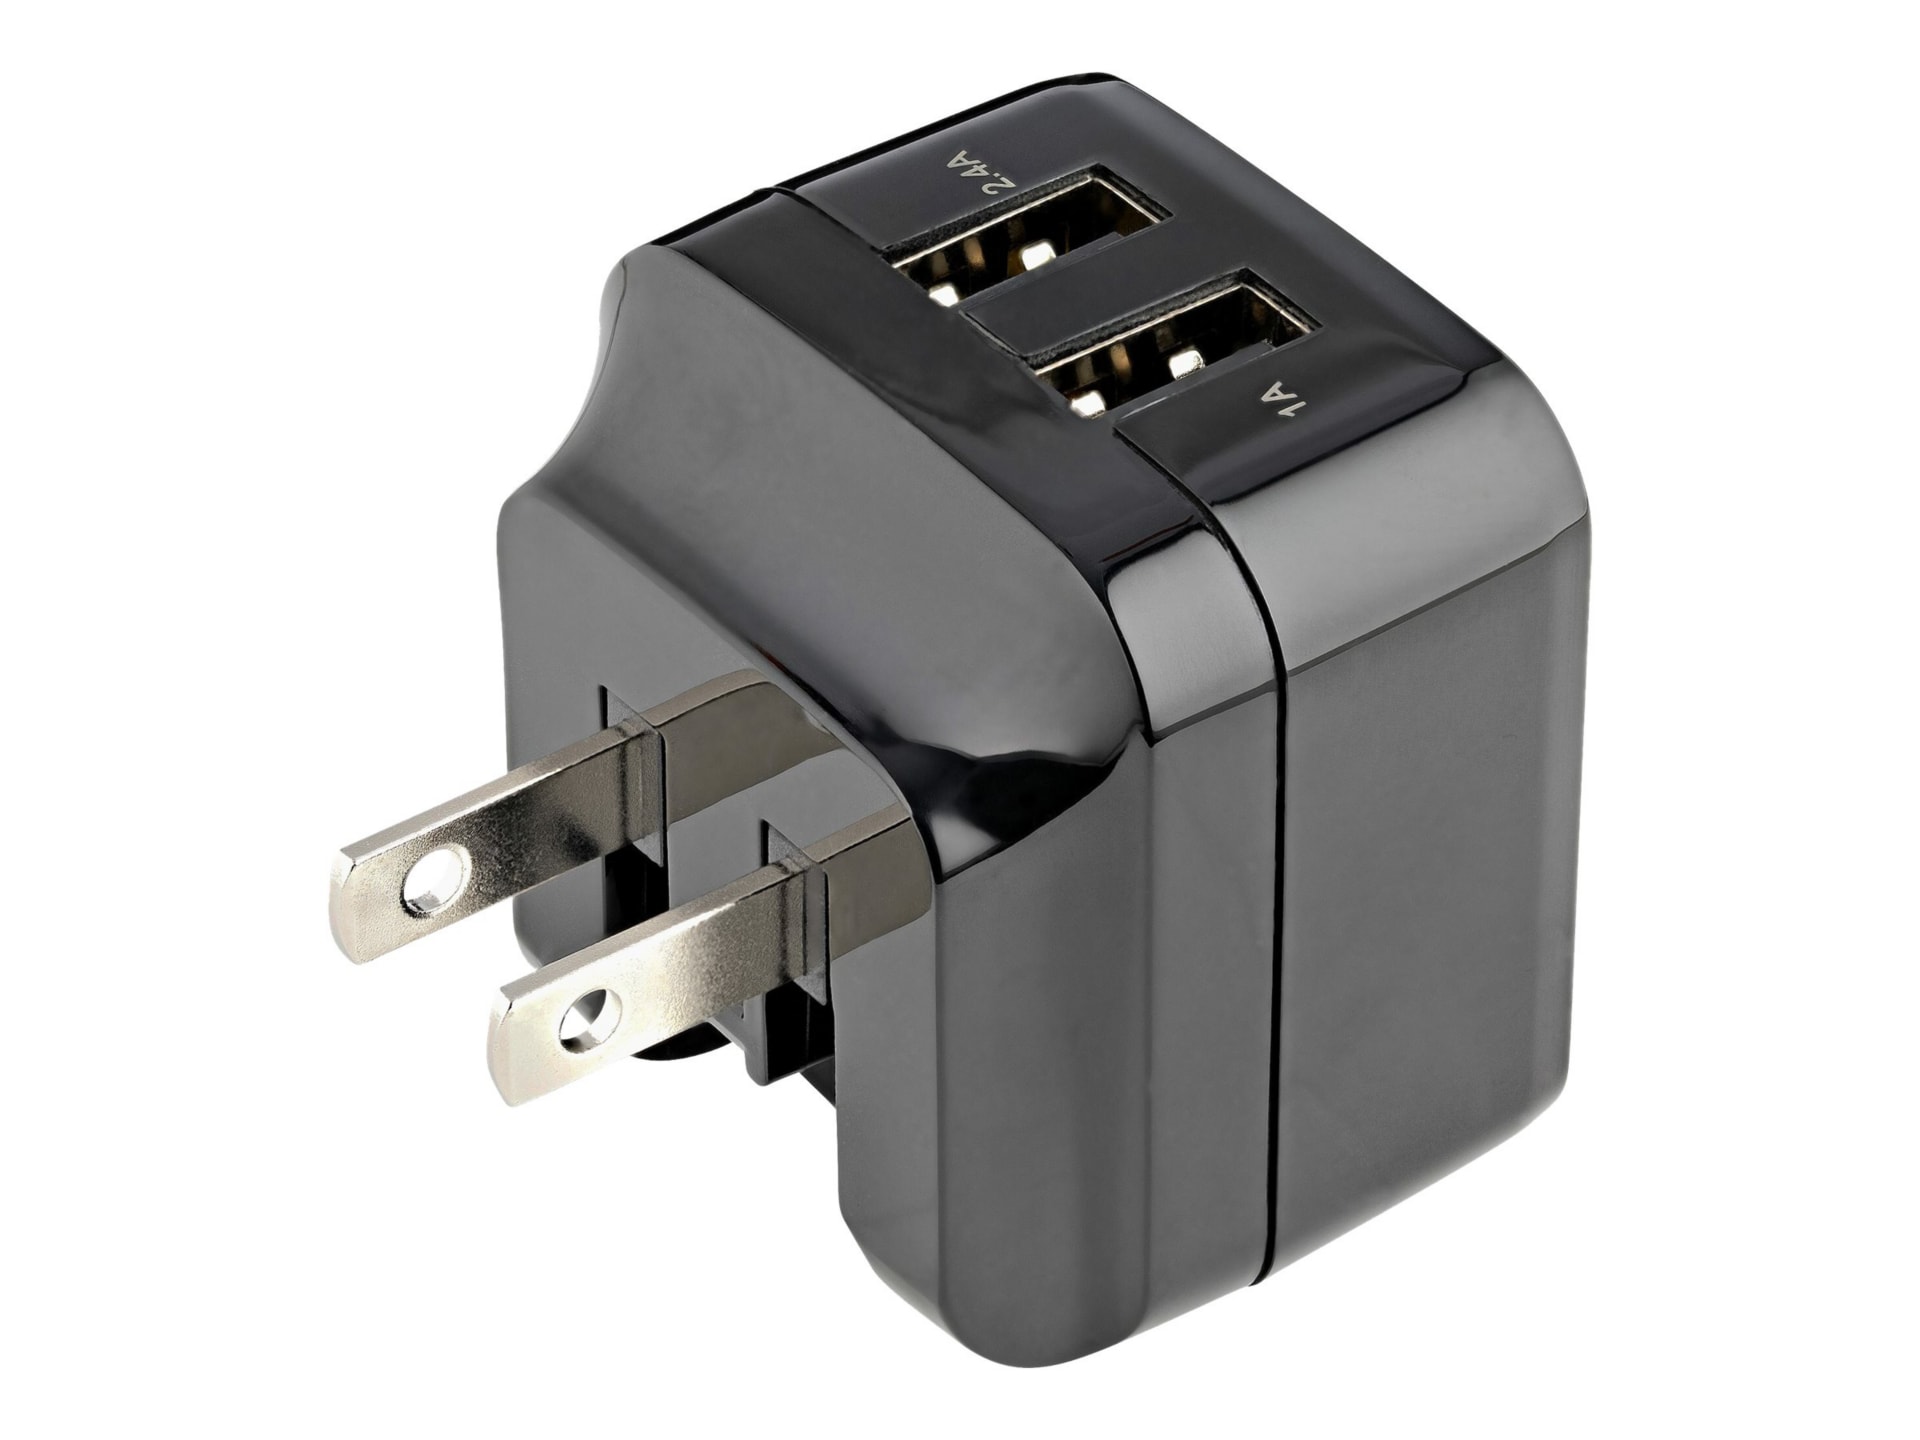 StarTech.com 2 Port USB Wall Charger - 17W Portable Charger, 2.4A & 1A port